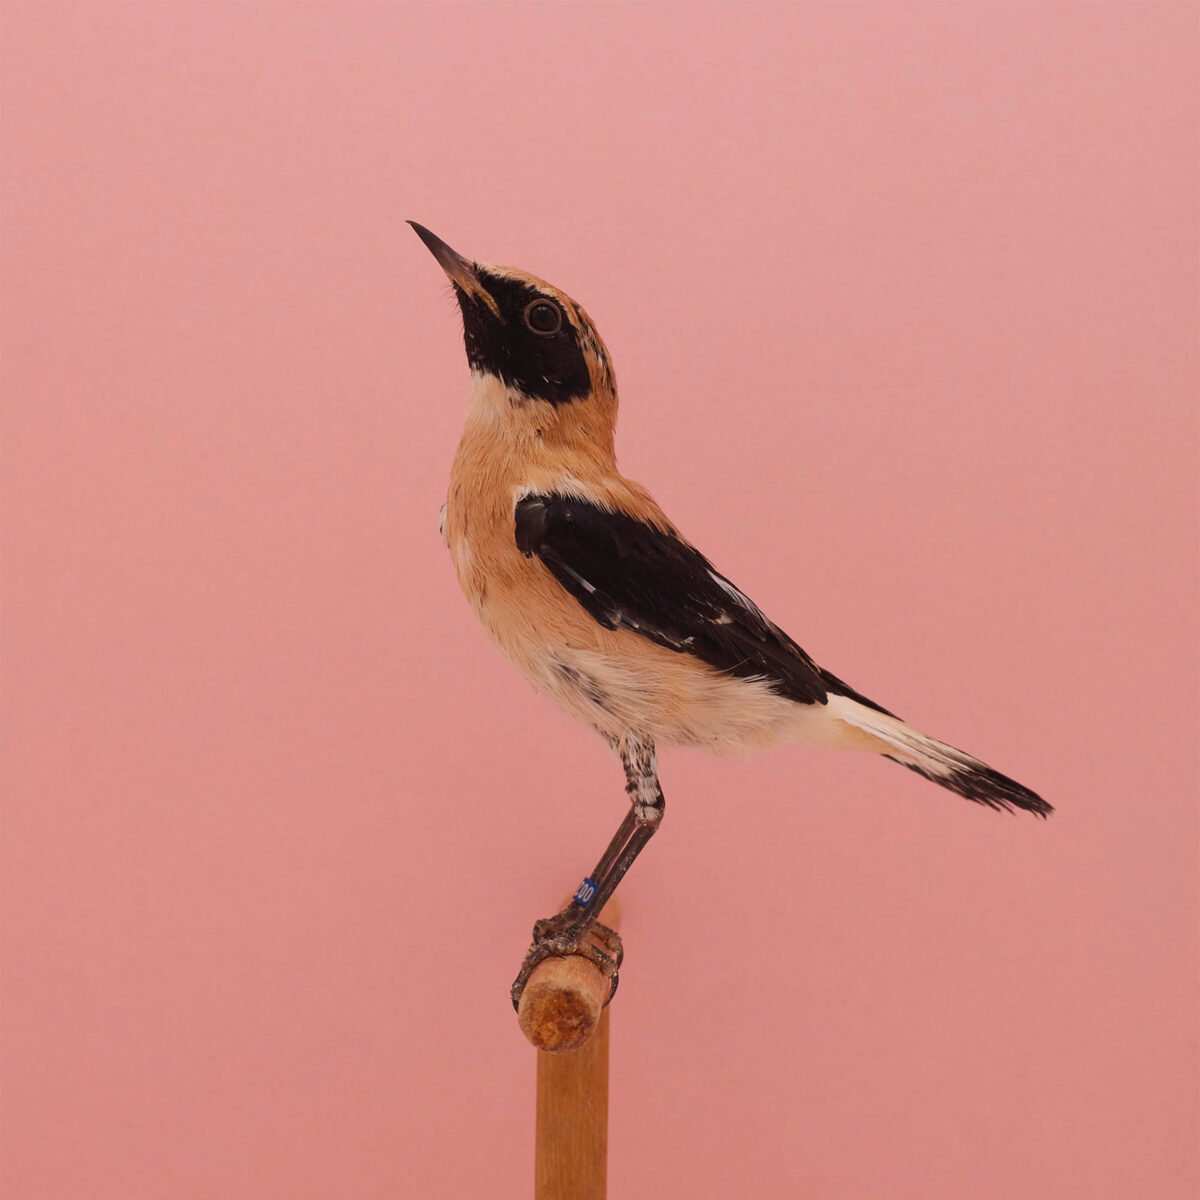 An Incomplete Dictionary Of Show Birds A Minimalist Bird Photography Series By Luke Stephenson (18)